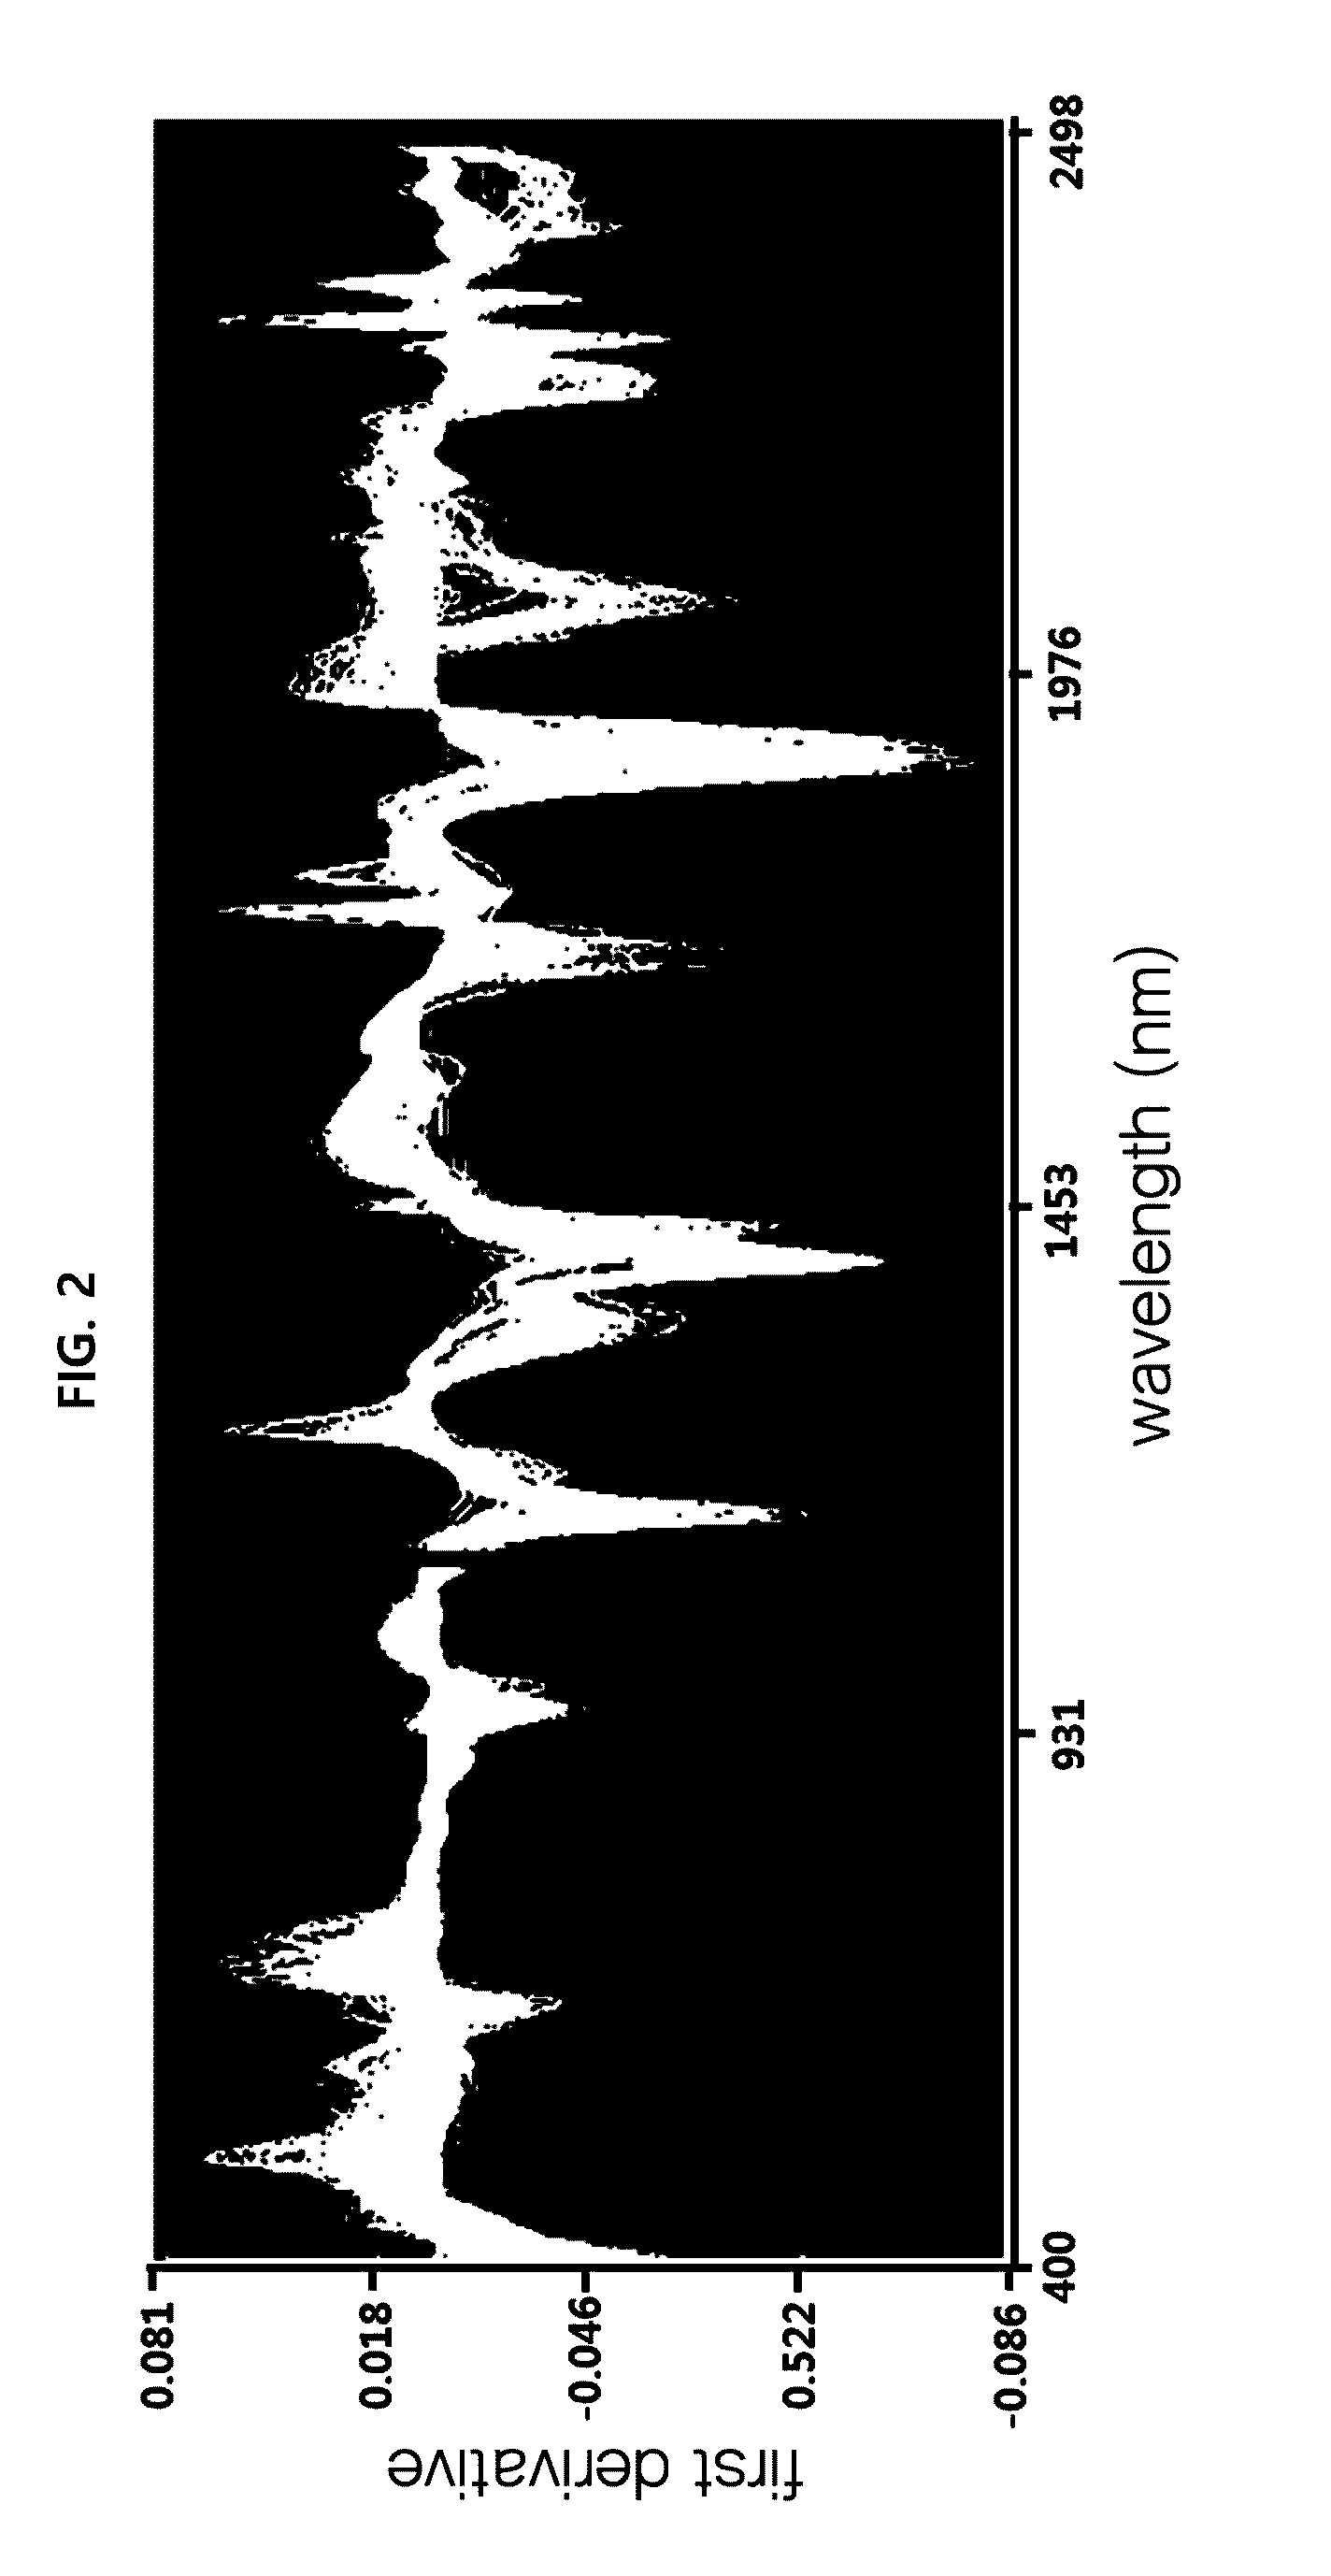 Method of simultaneously analyzing amount of nutritional component in various foods having different physicochemical properties and compositions by near-infrared reflectance spectroscopy